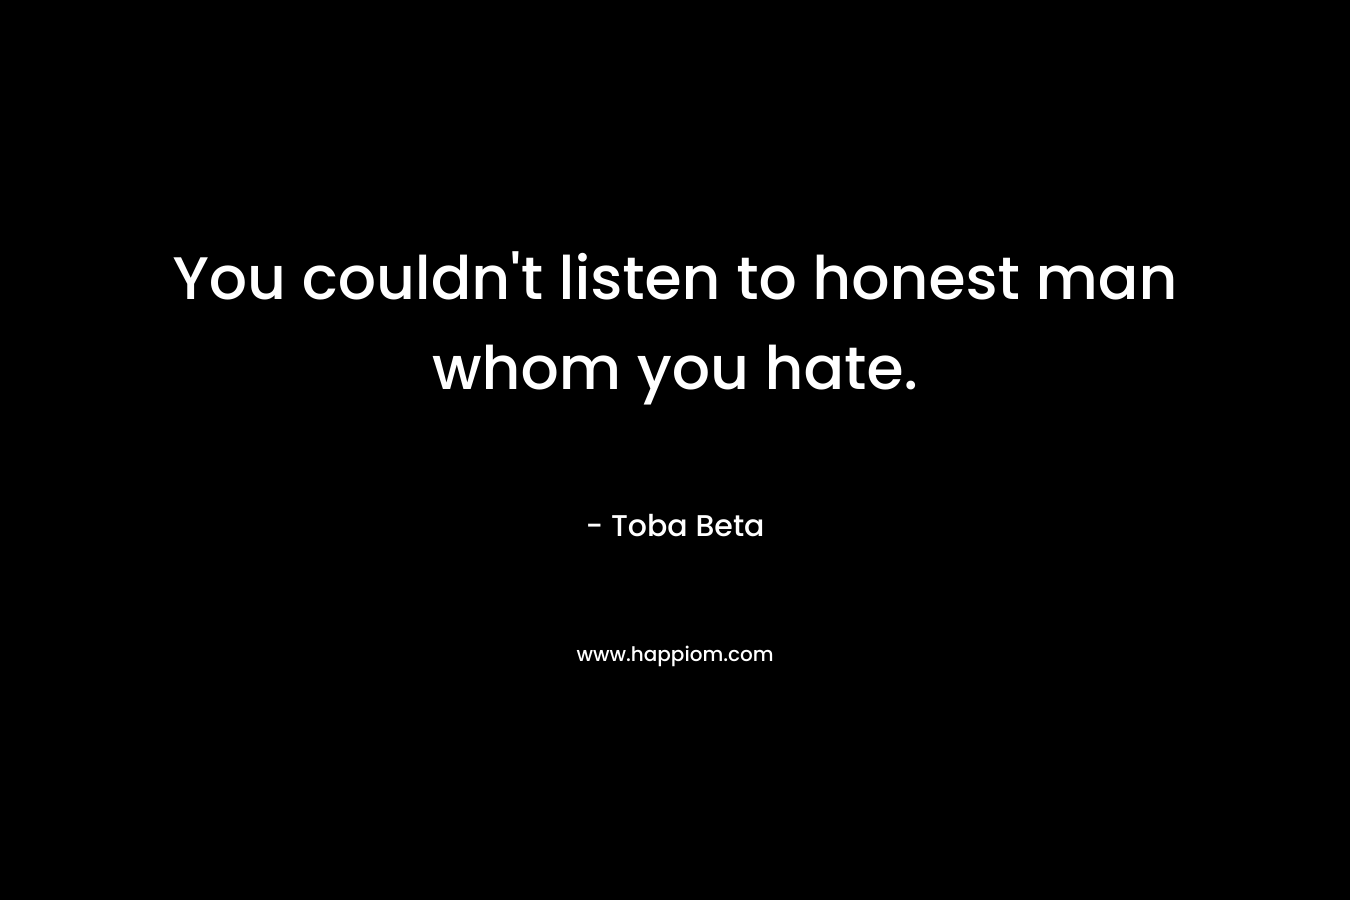 You couldn’t listen to honest man whom you hate. – Toba Beta